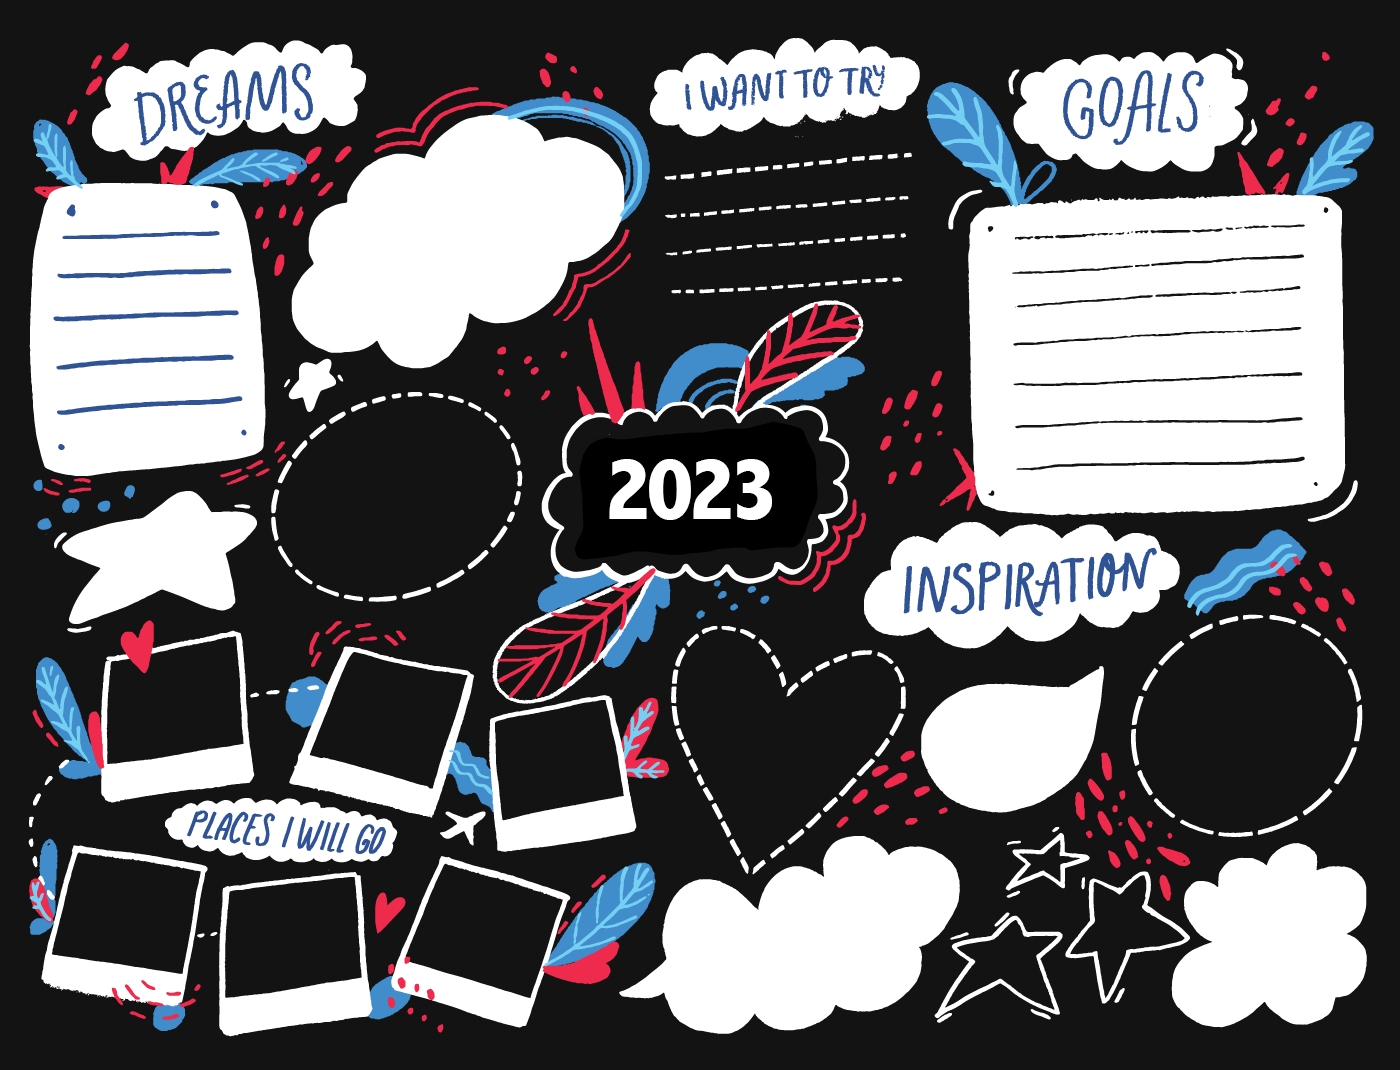 Make a Vision Board - Clarify your direction for 2023 (and beyond) with this inspiring art project.